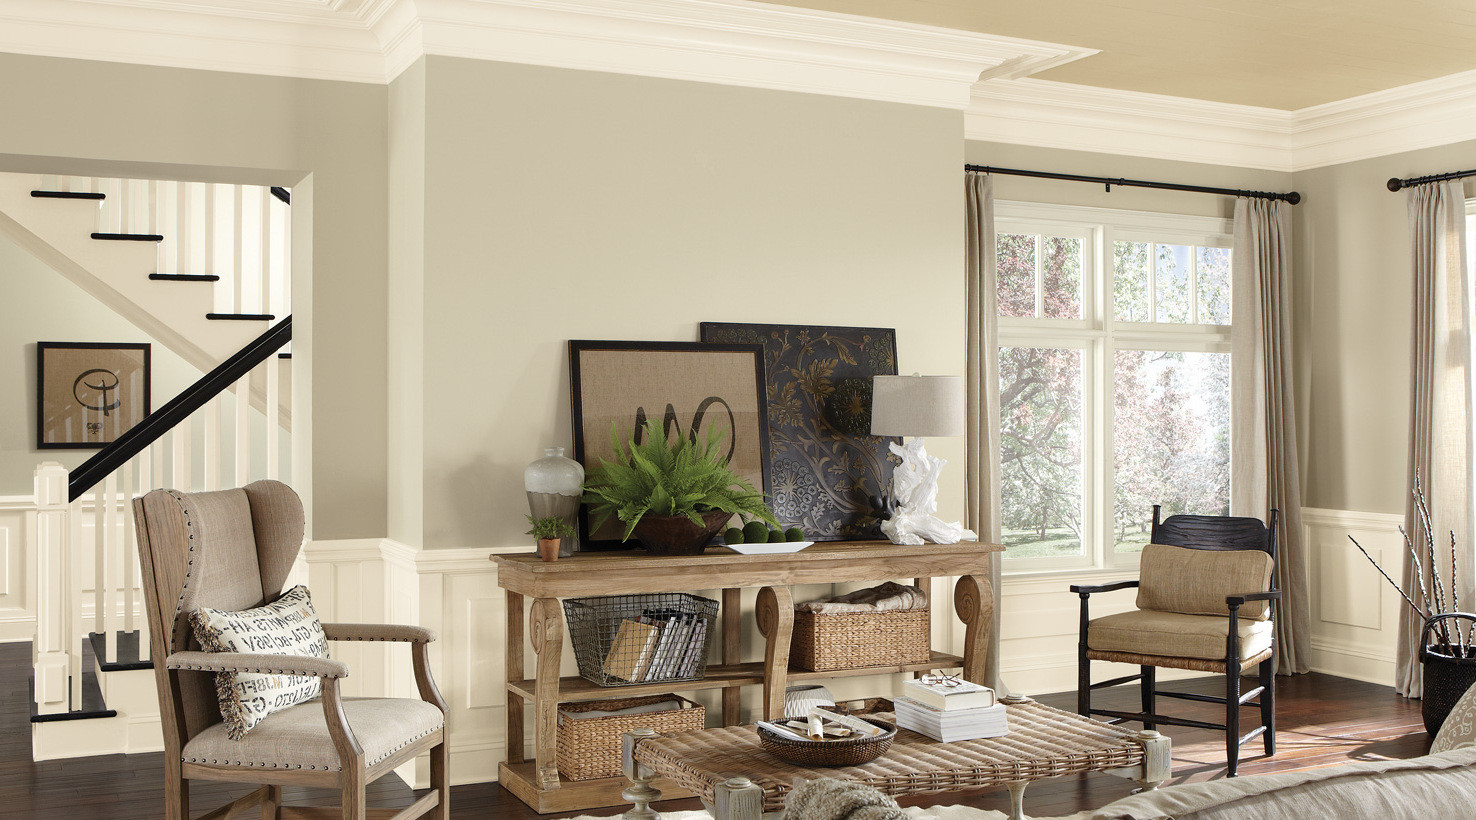 Paint Color For Living Room
 Best Paint Color for Living Room Ideas to Decorate Living